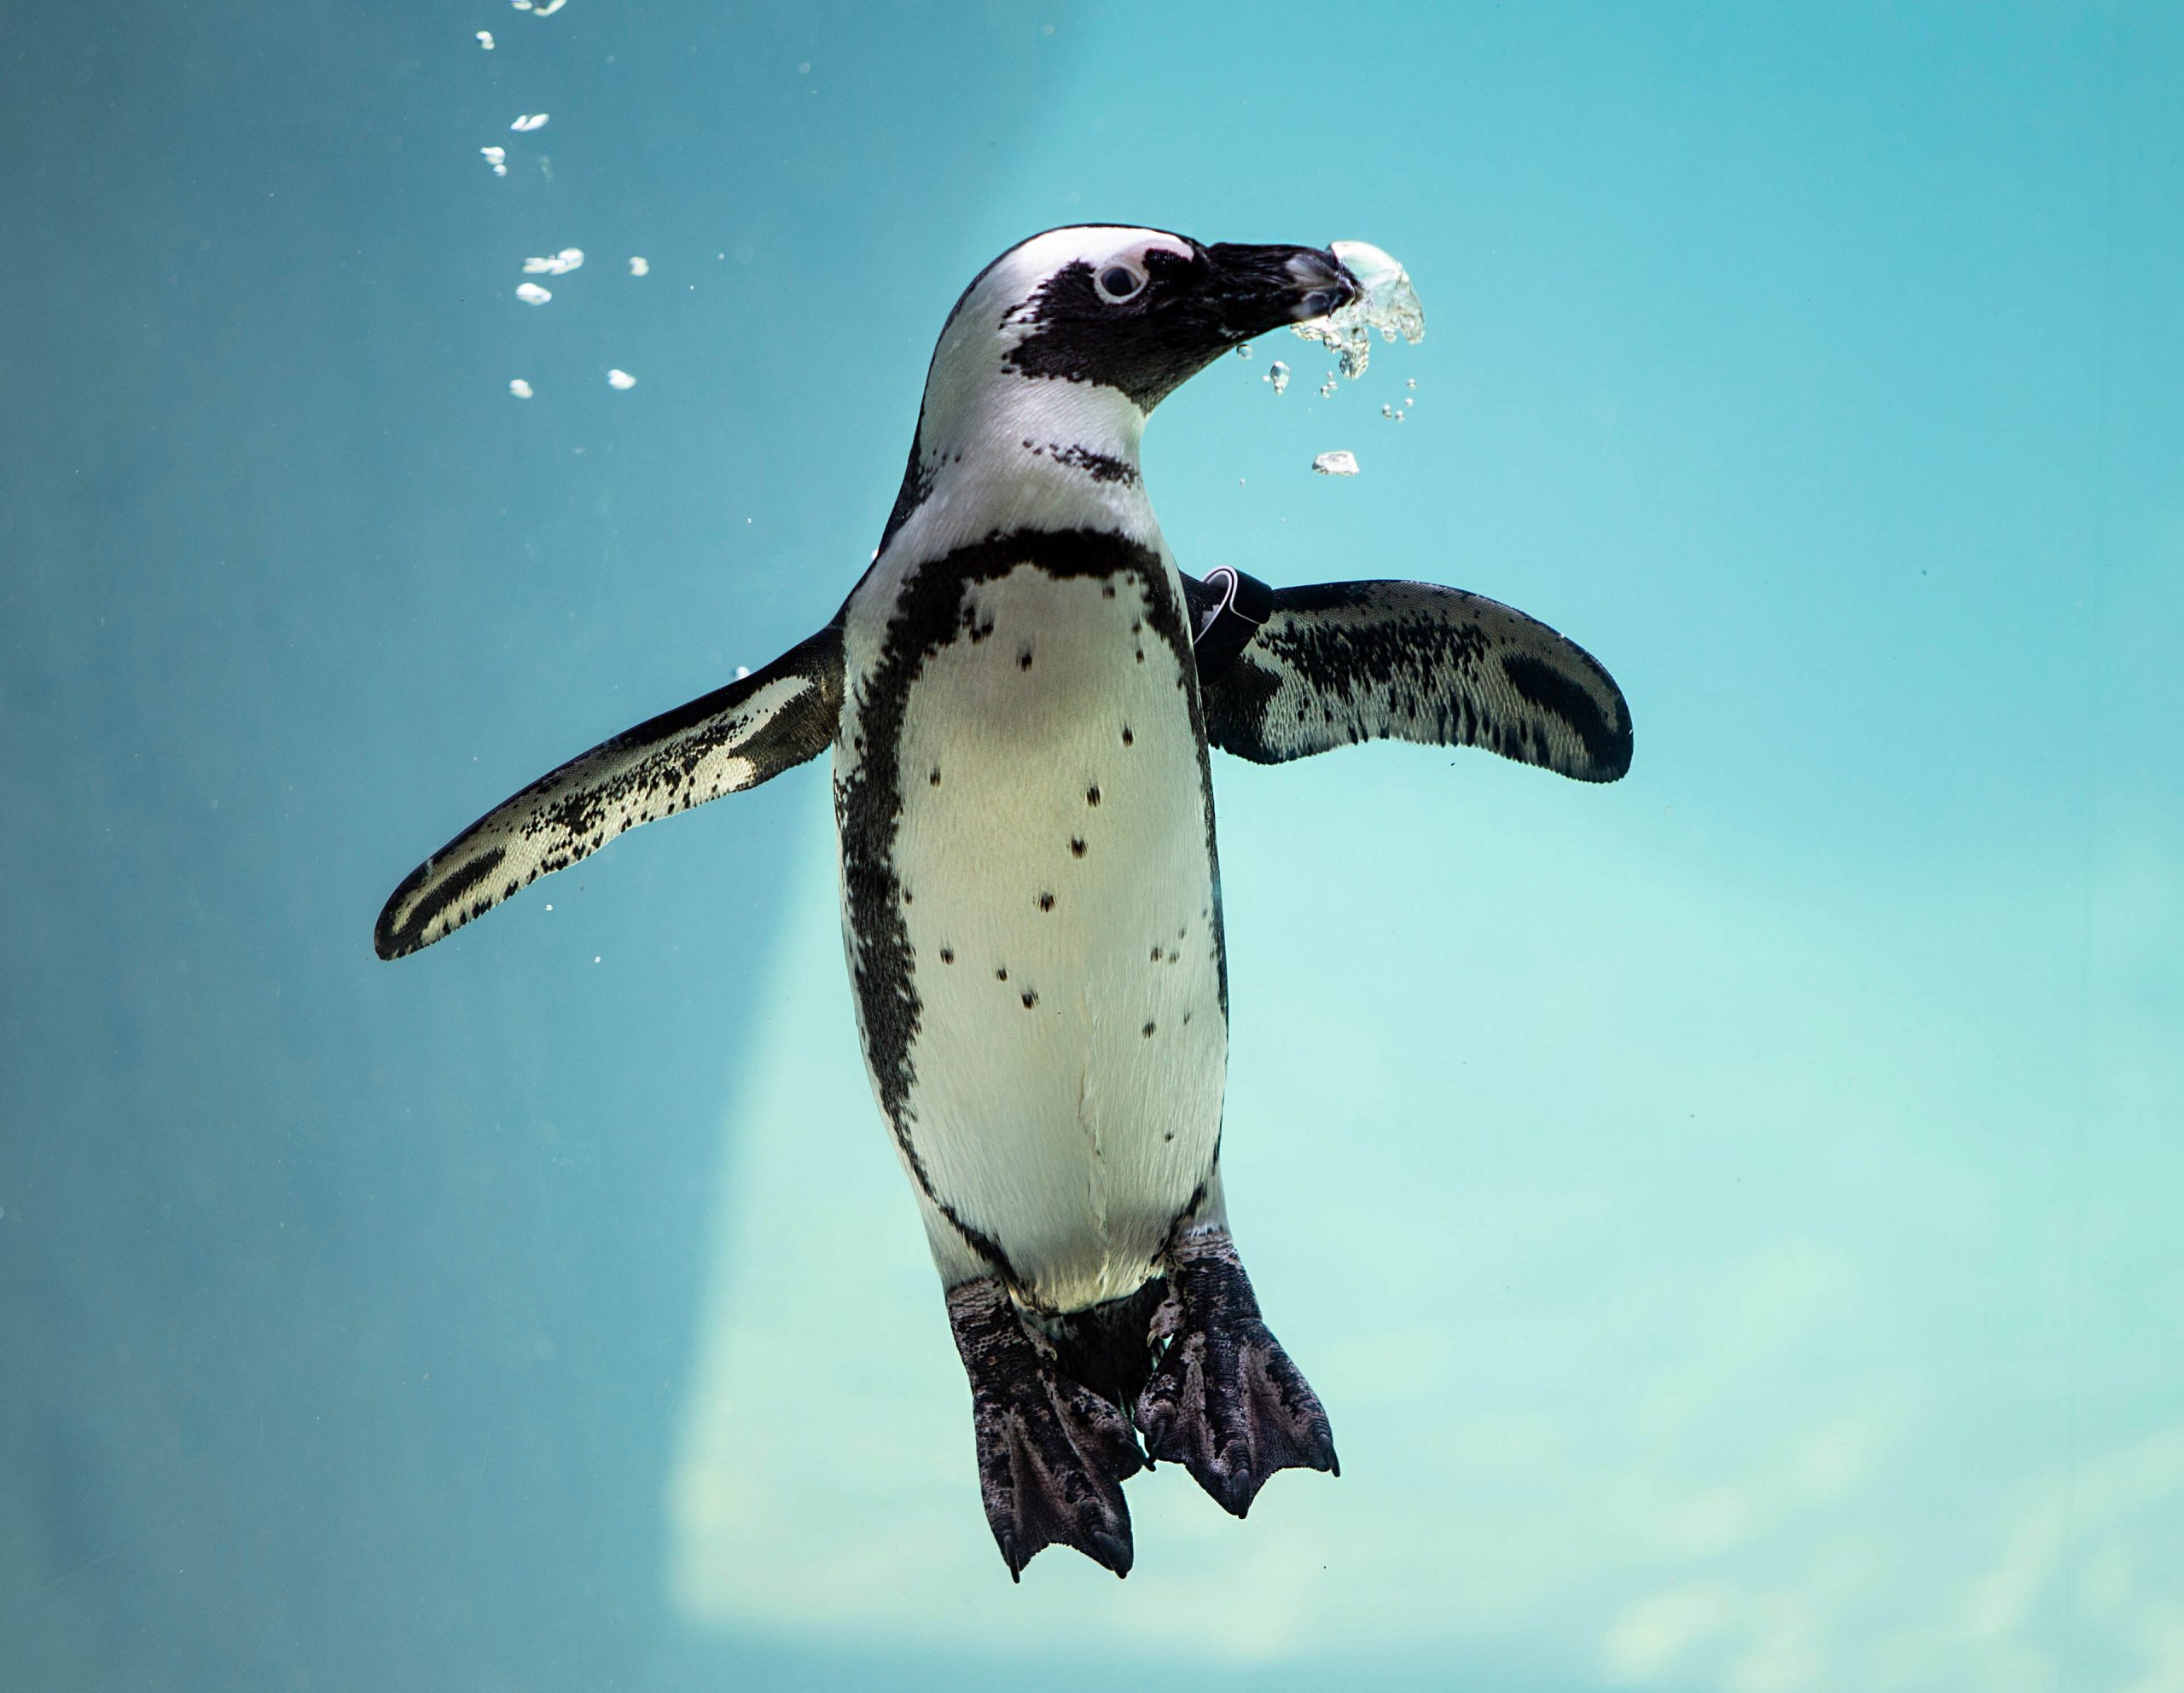 An African Penguin swimming underwater